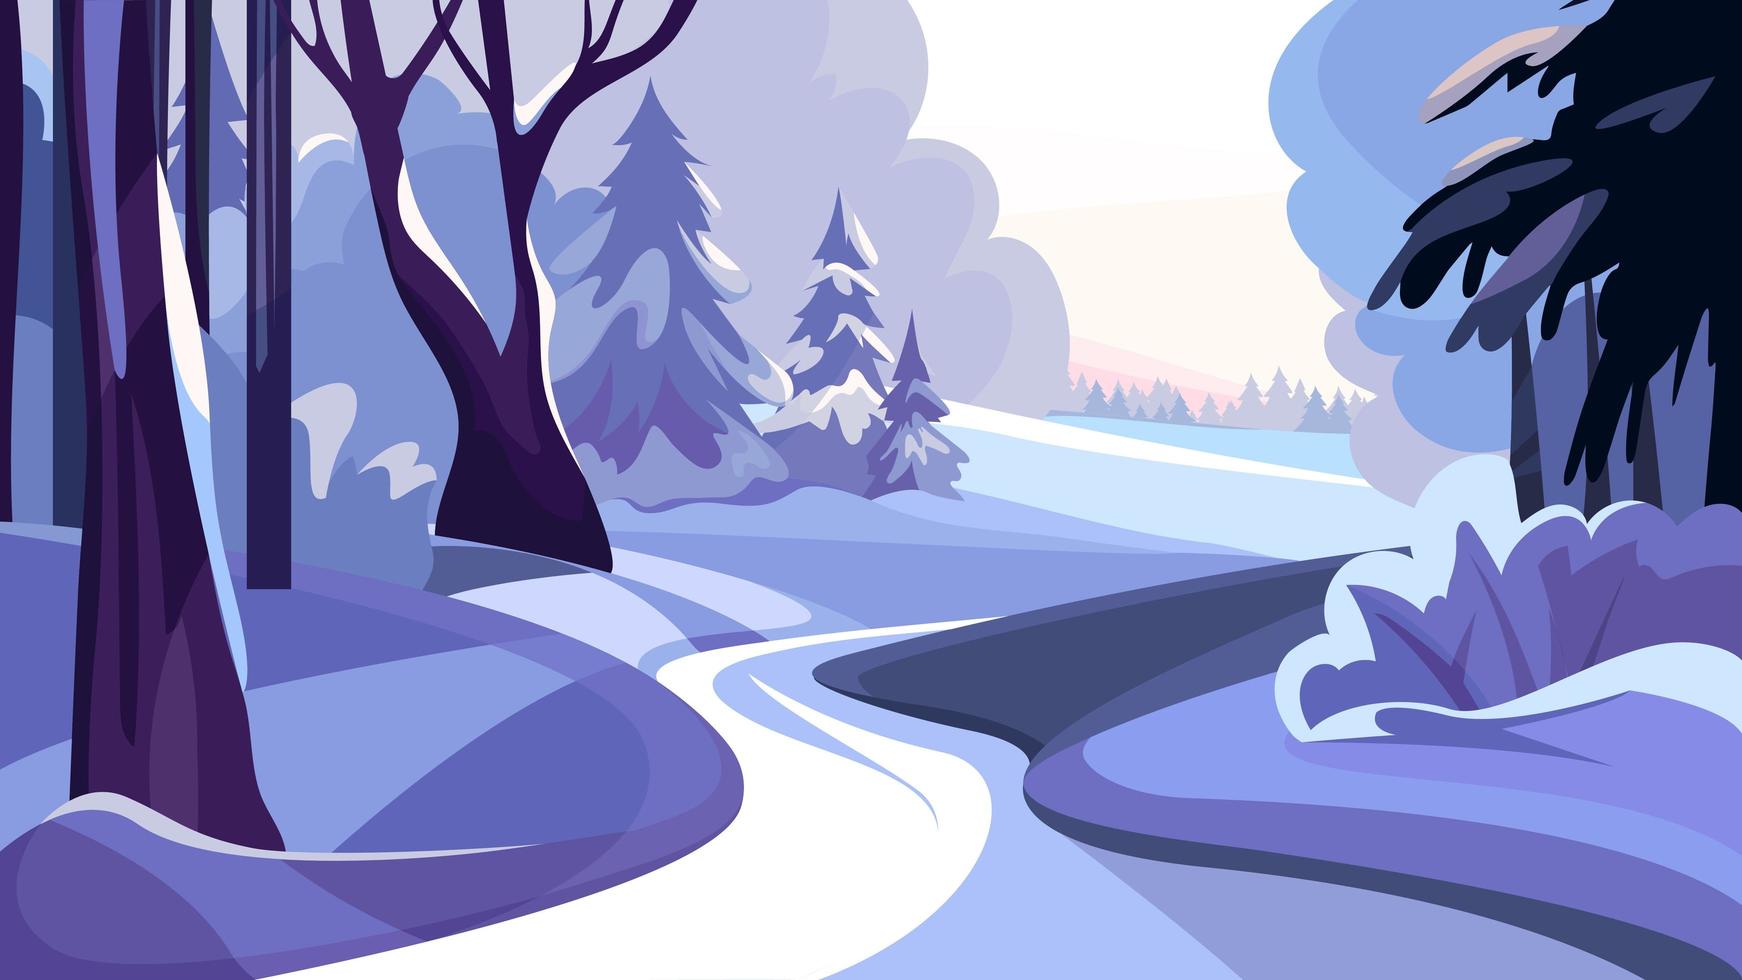 Snowy Winter Forest Download Free Vectors Clipart Graphics Vector Art